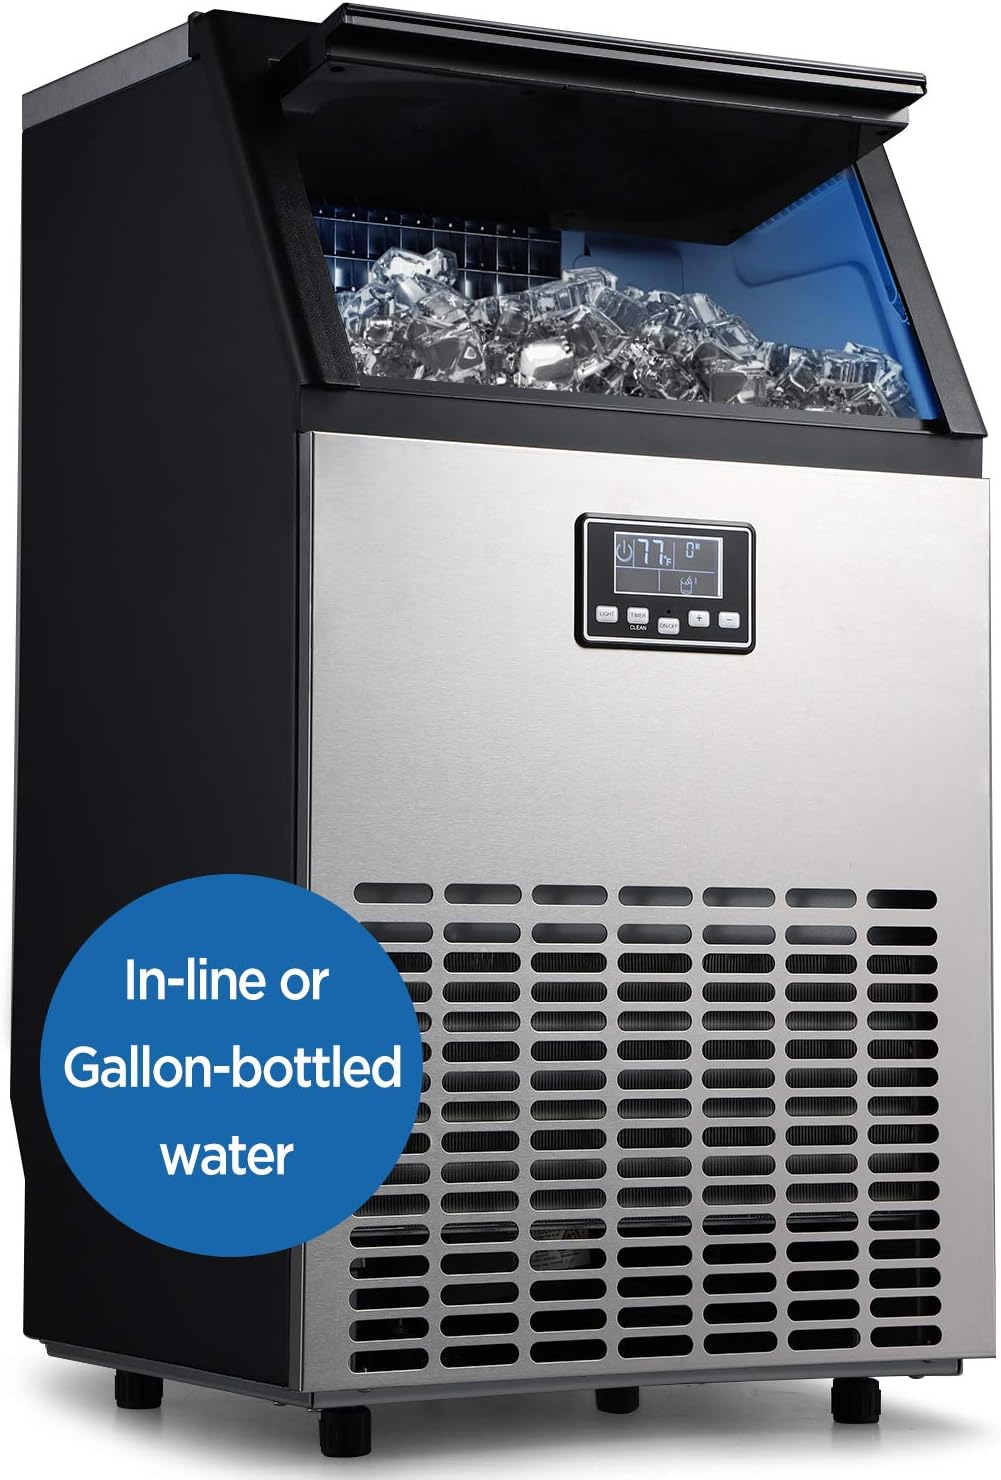 WATOOR Commercial Ice Maker Machine Review